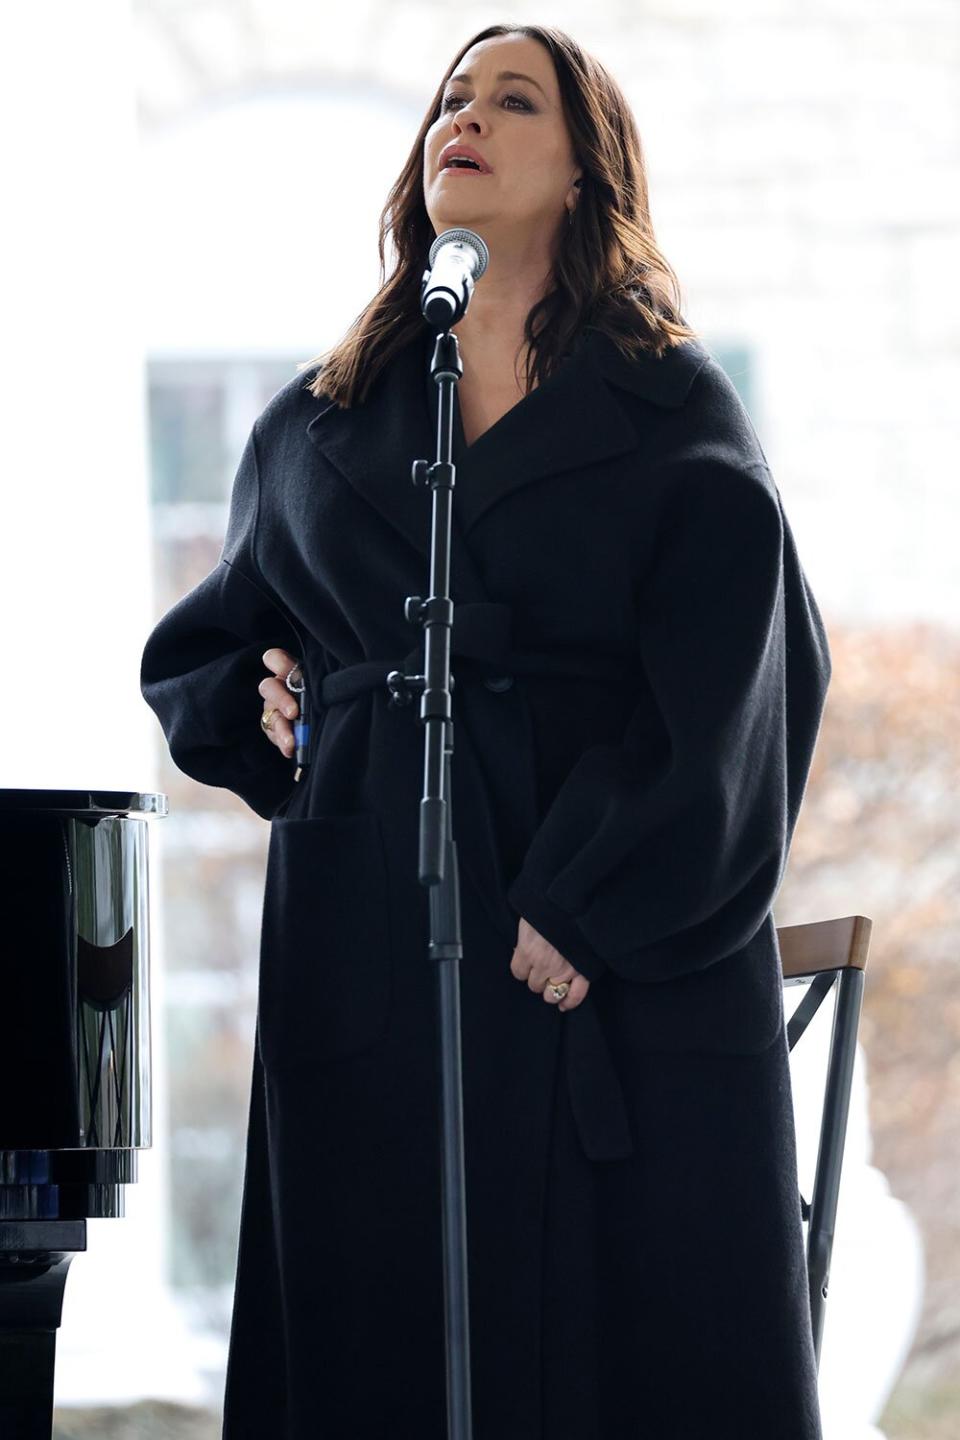 MEMPHIS, TN - JANUARY 22: Alanis Morissette performs on stage at the Lisa Marie Presley Public Memorial on January 22, 2023 in Memphis, Tennessee. Presley, 54, the only child of American singer Elvis Presley, died on January 12, 2023 in Los Angeles.  (Photo by Jason Kempin/Getty Images)